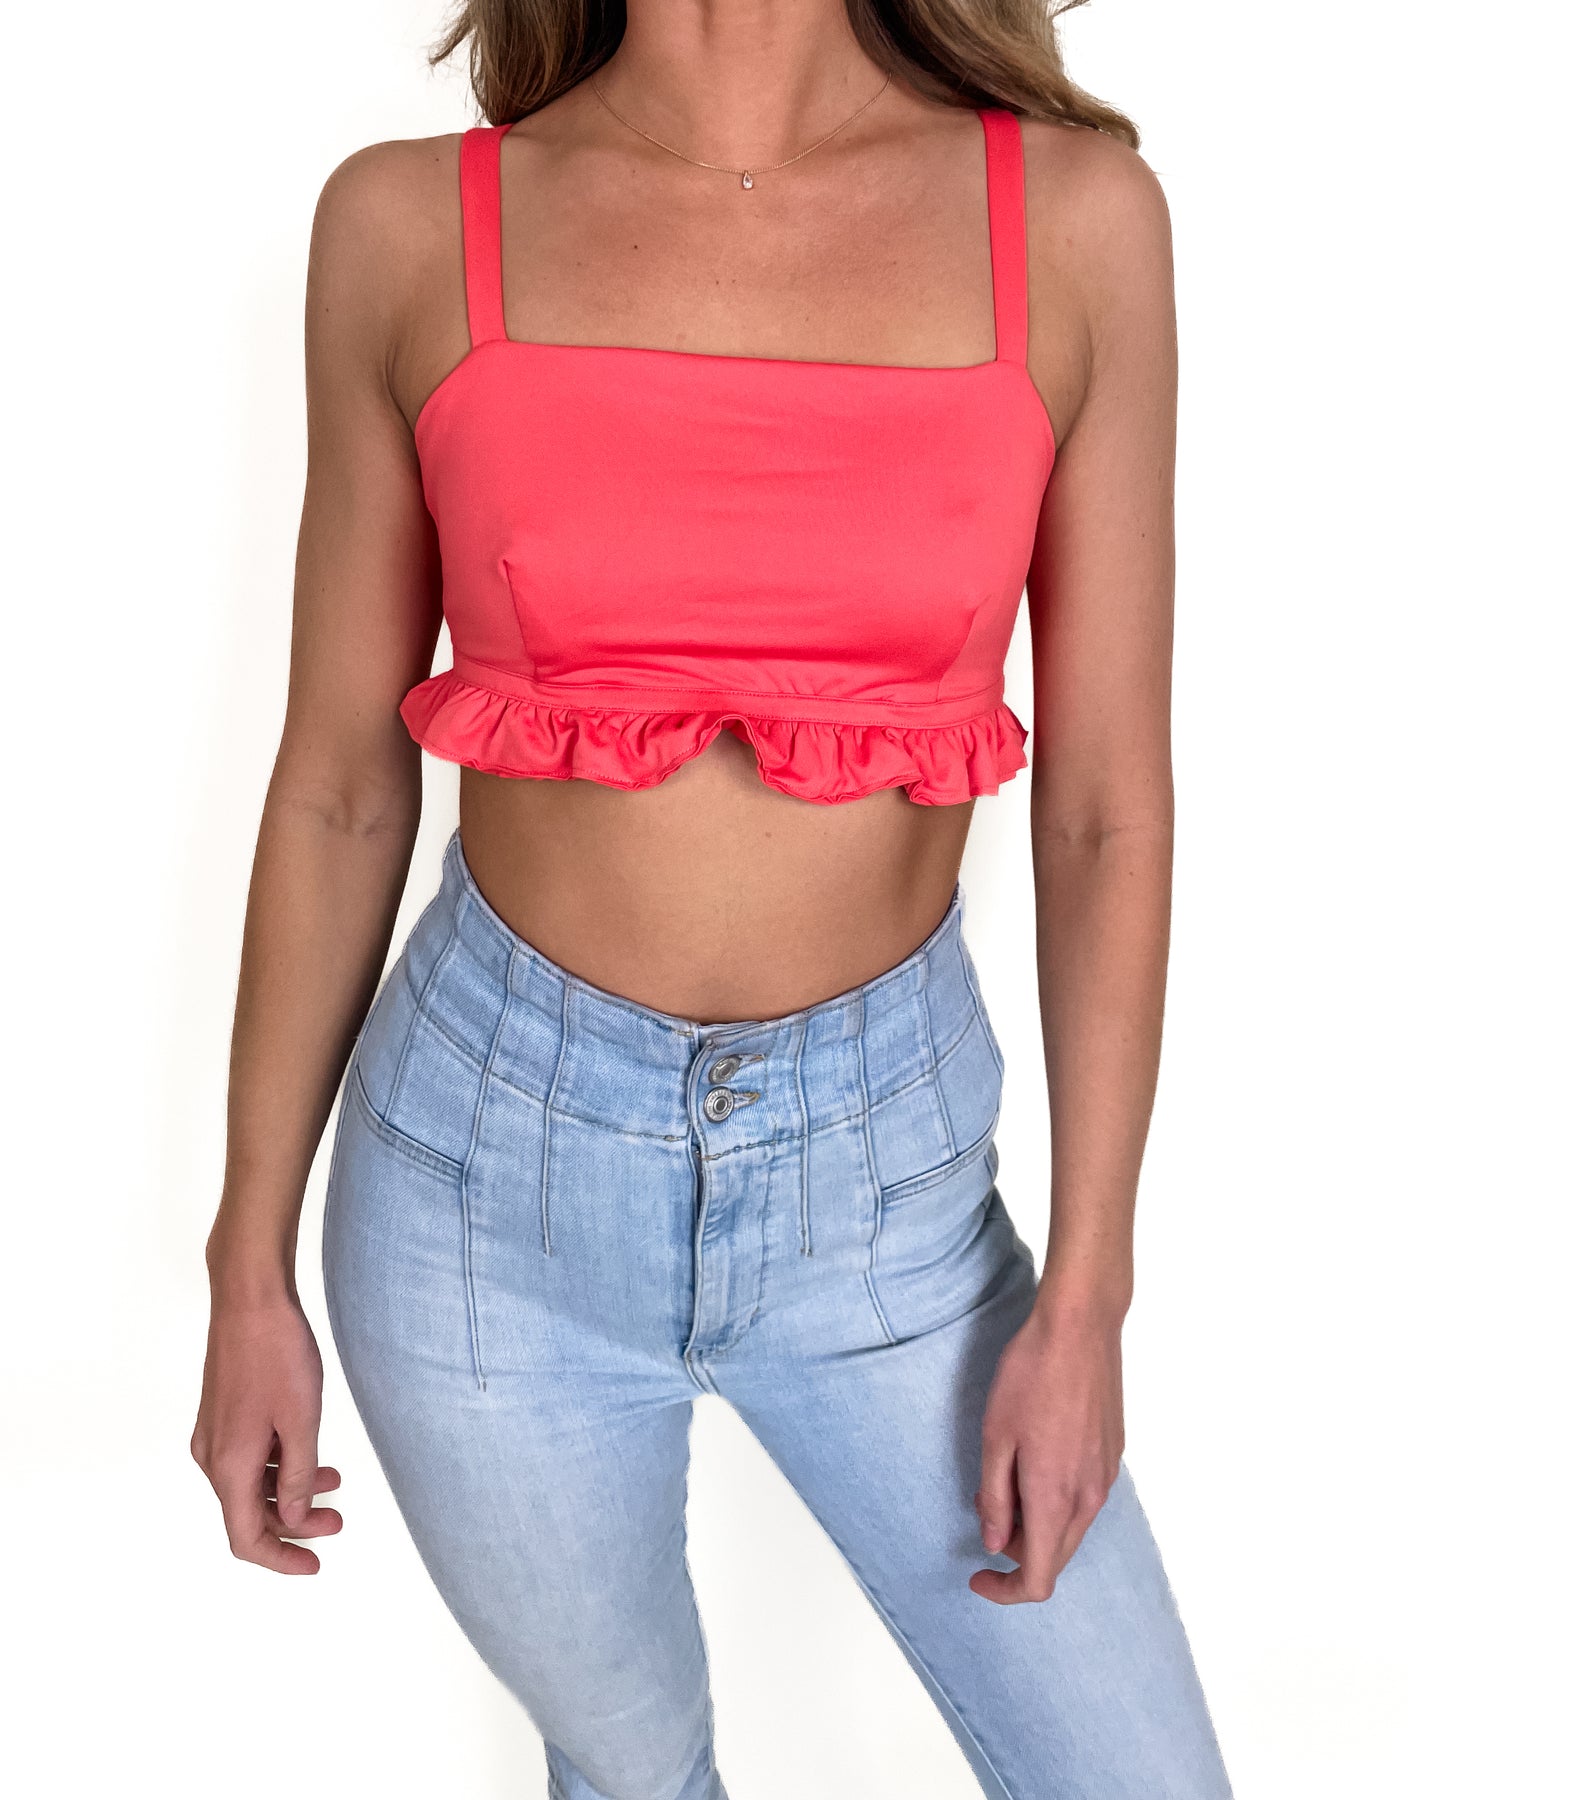 Free People coral sports bra (size M) – Well-Dressed